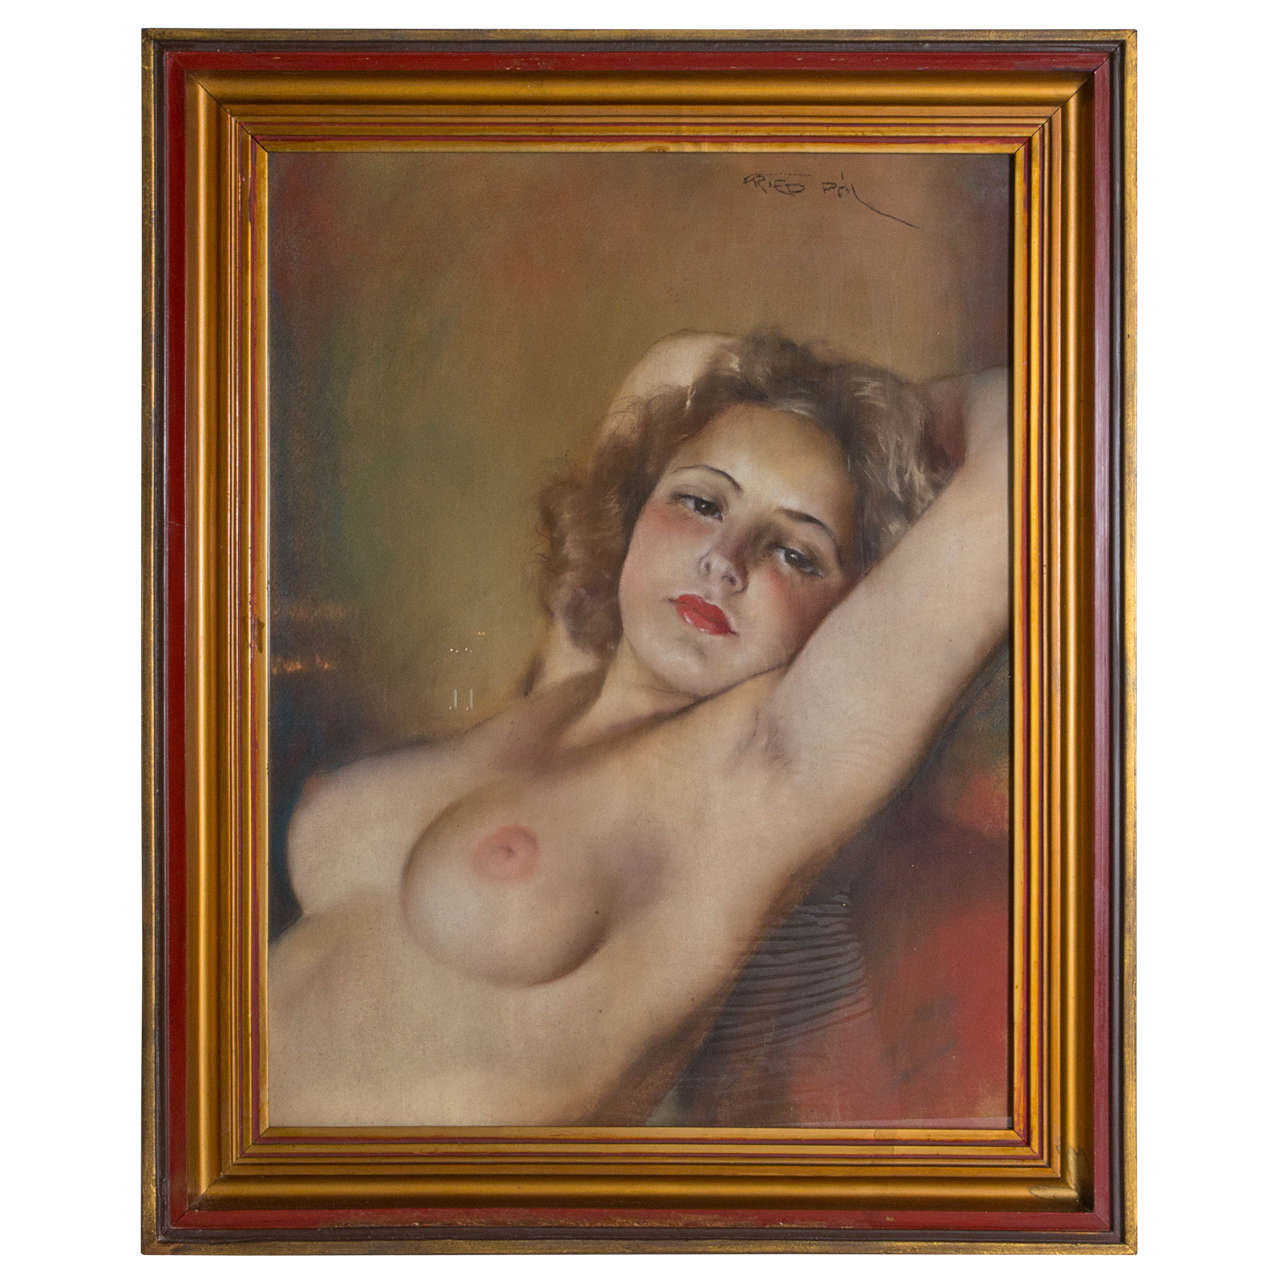 Original hand painted pastel of a nude by Pal Fried